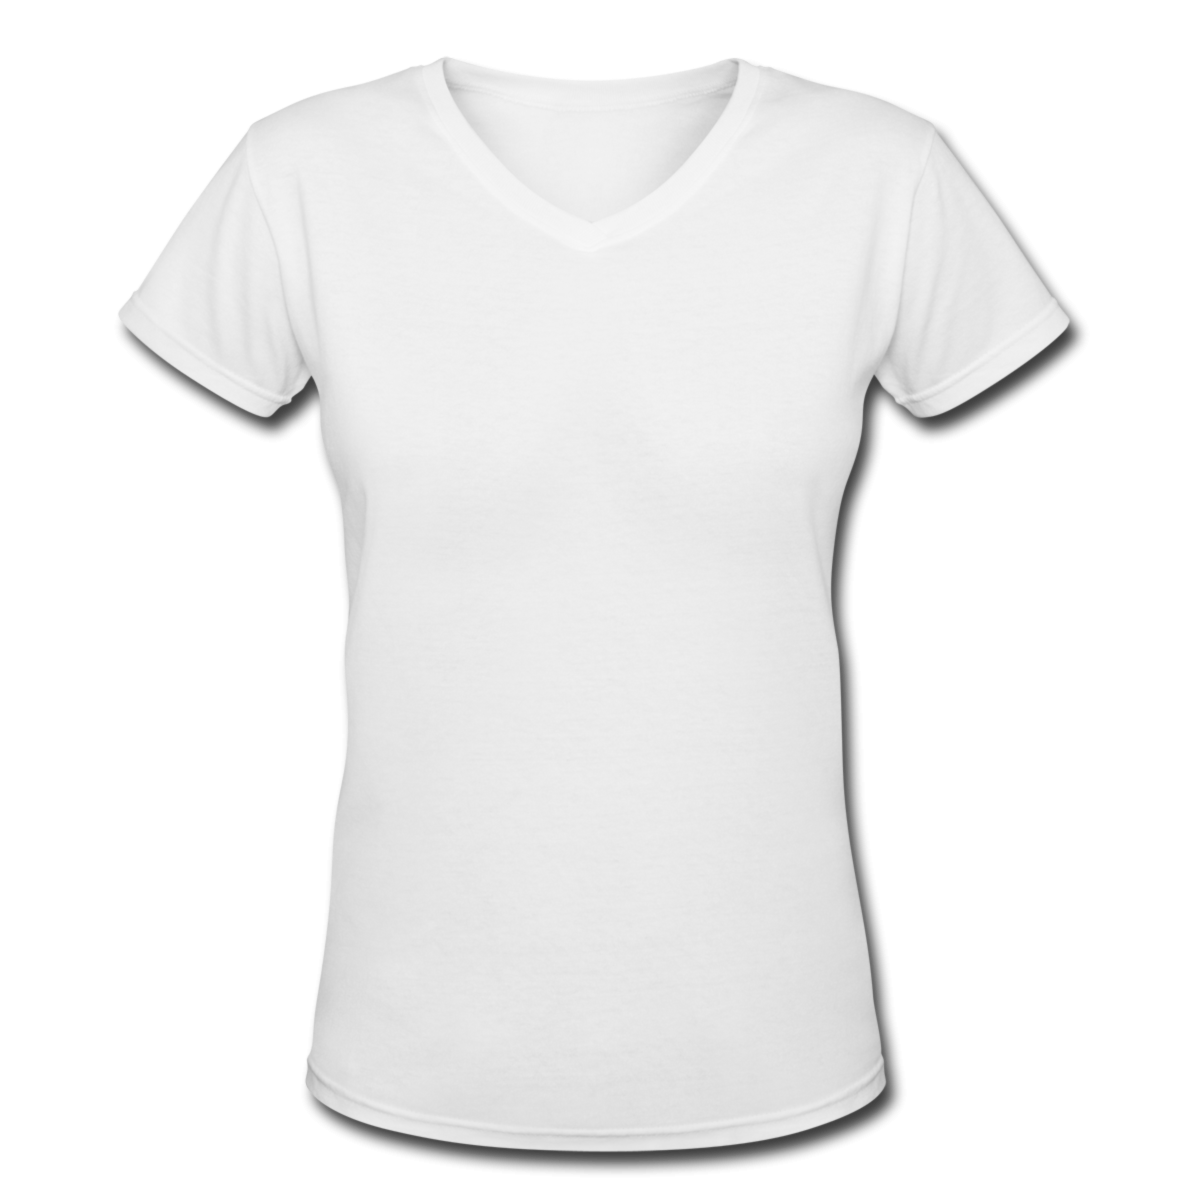 Blank T-Shirt PNG Image with Transparent Background